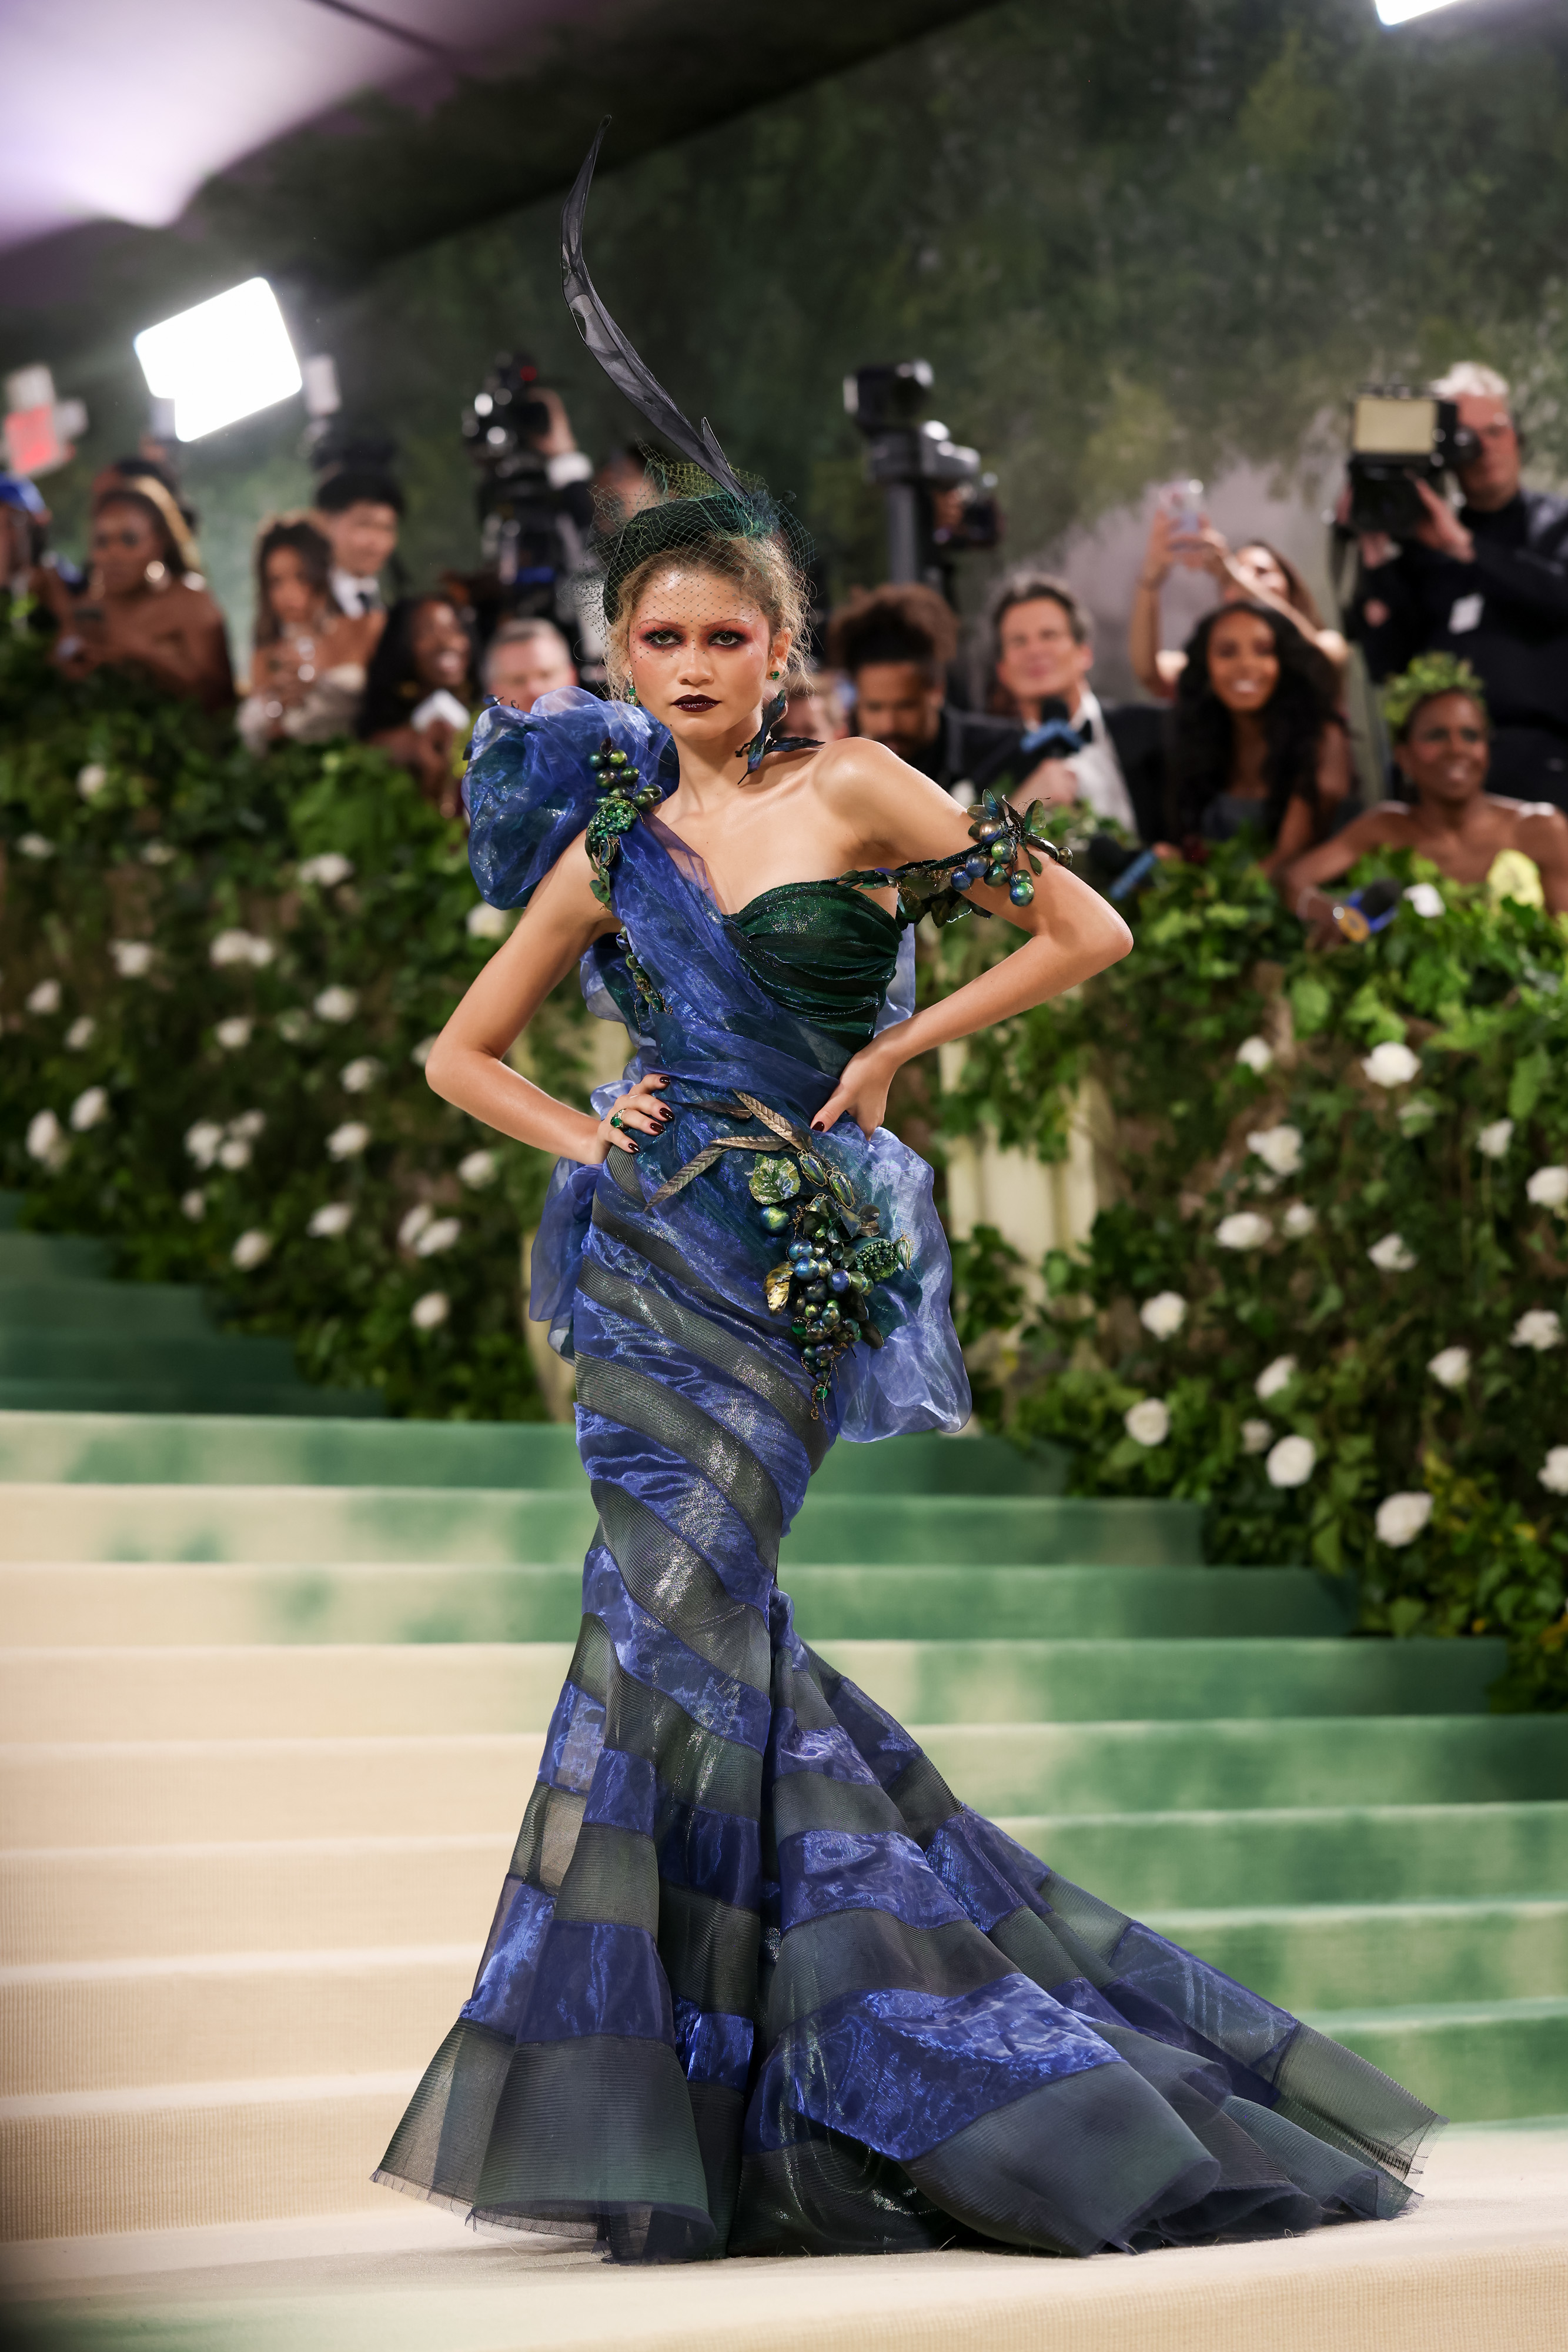 Zendaya in a sculptural blue gown with green accents on a staircase at a gala event, photographers in the background